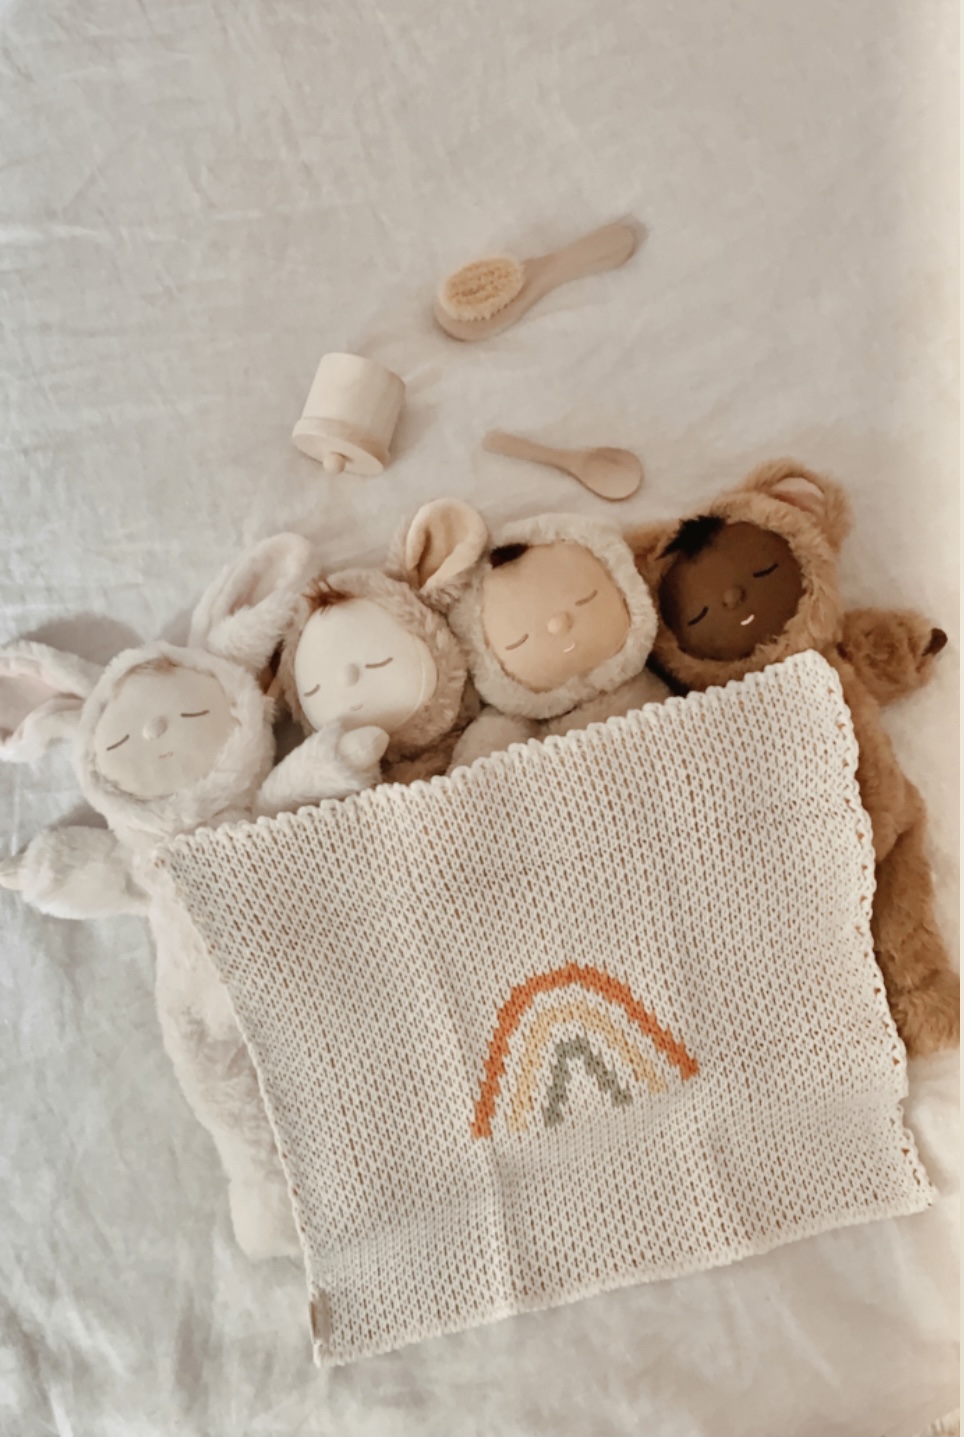 Cozy Dinkum Dolls and Care Pack #Littlefrenchheart